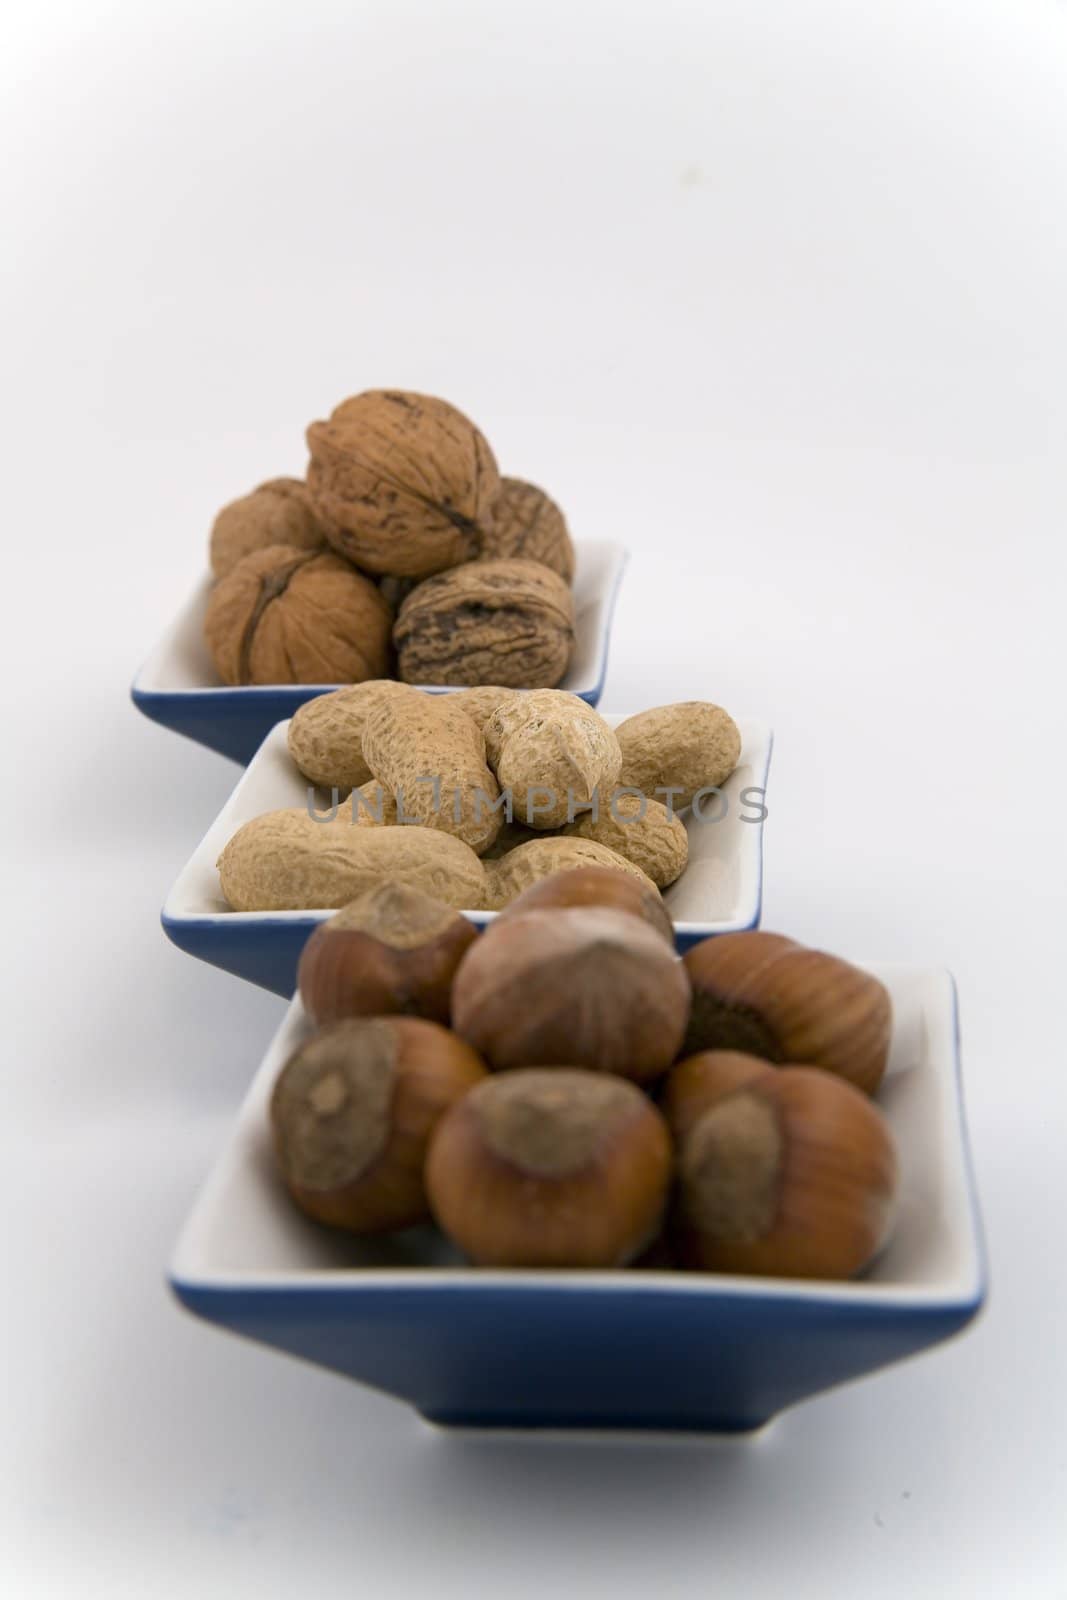 walnuts, hazelnuts and peanuts in three bowls on white background